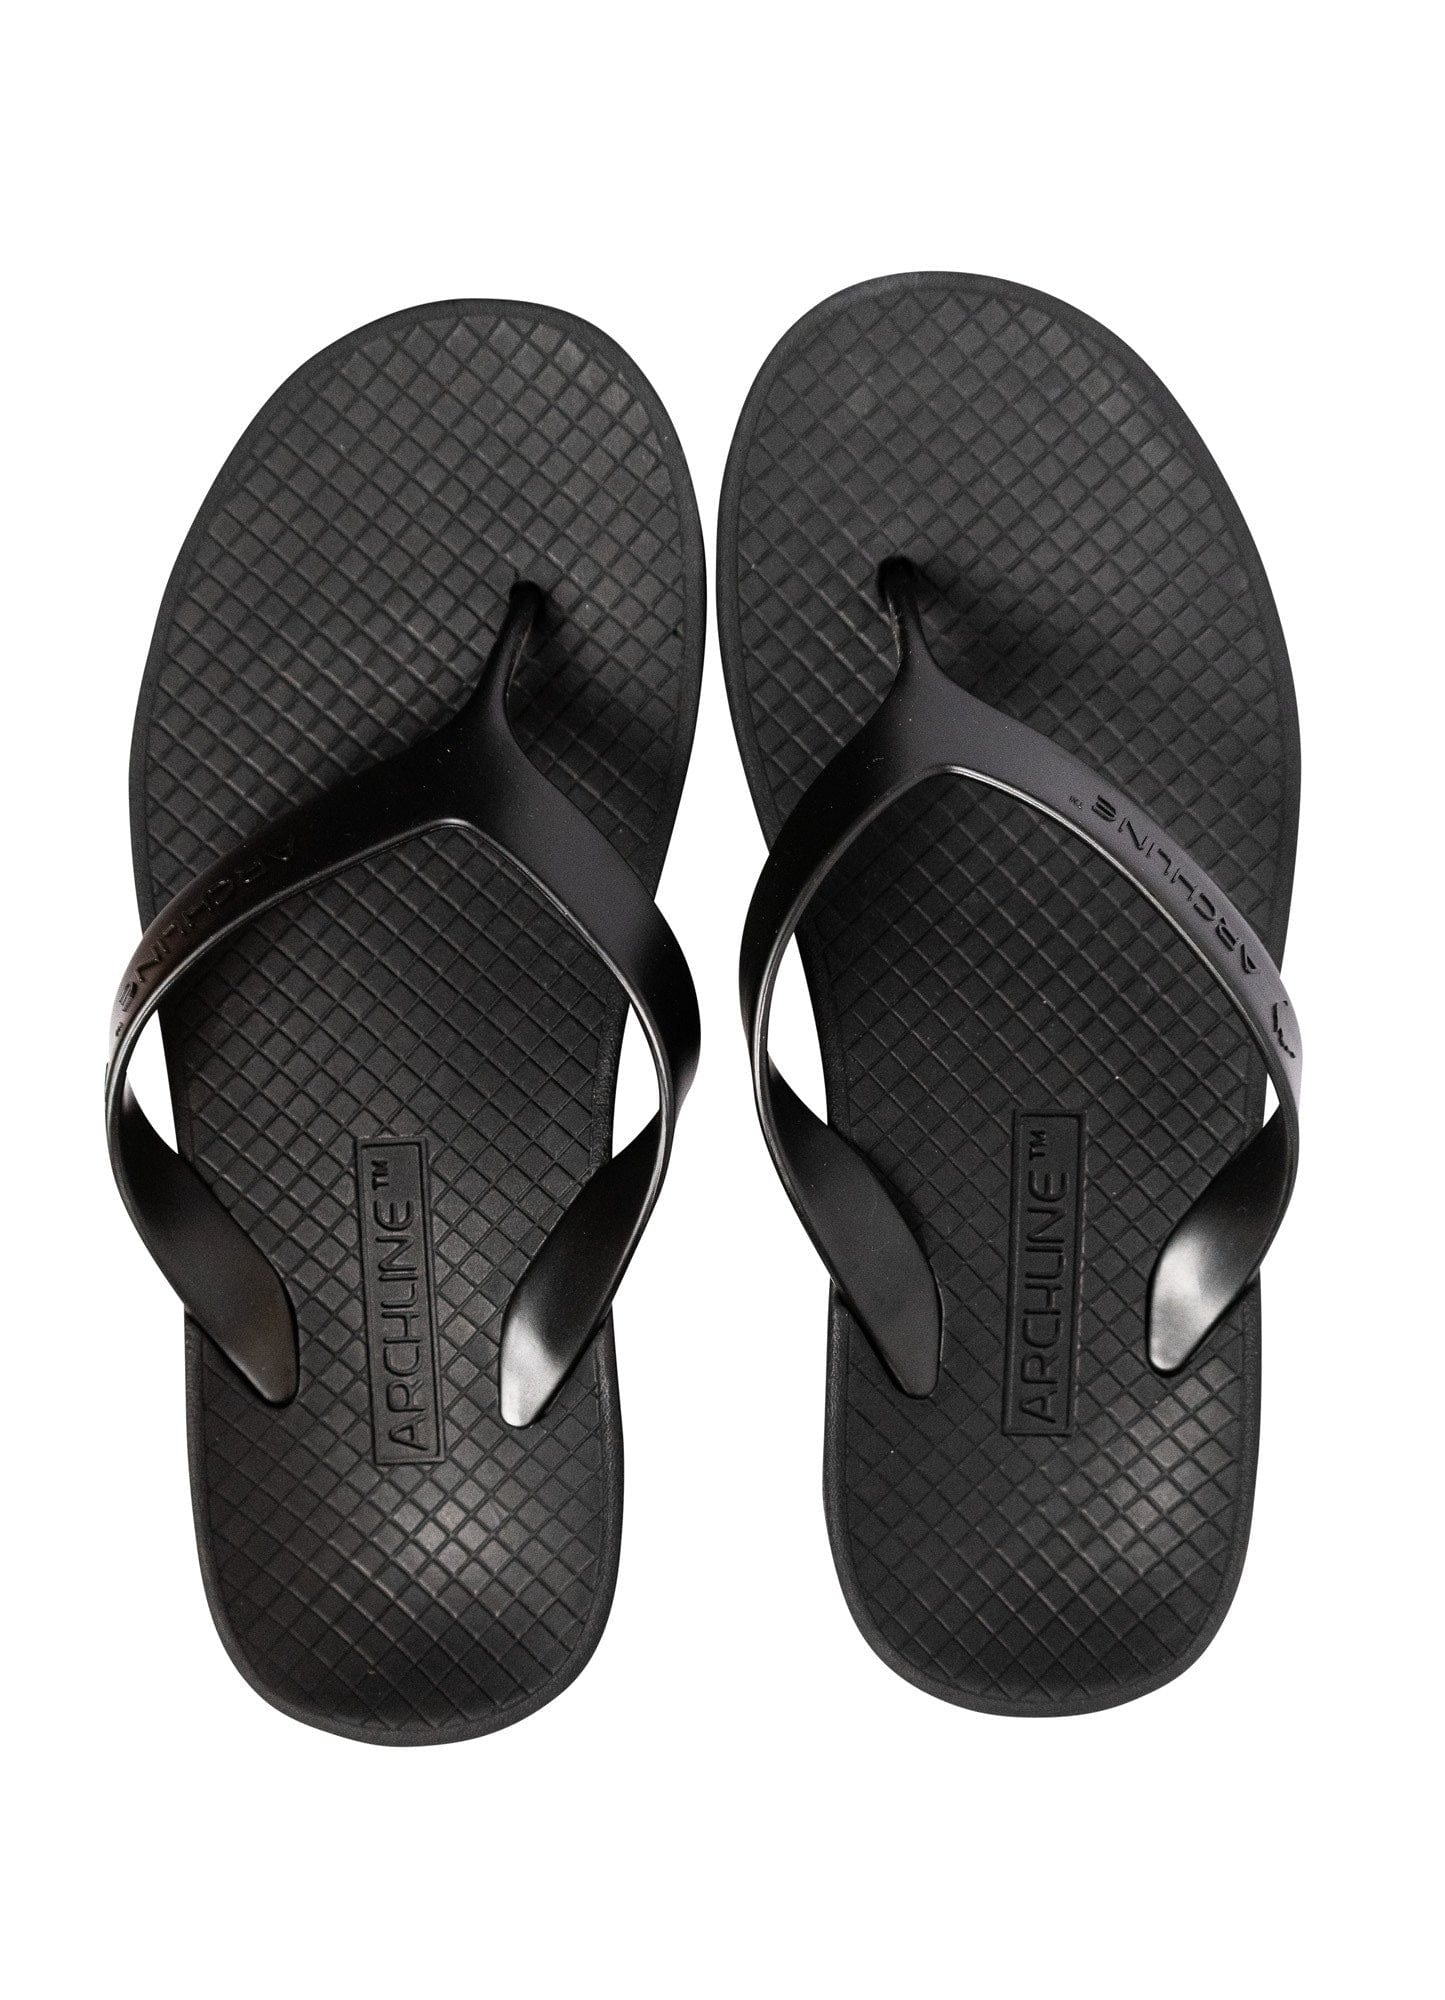 Foot HQ Footwear Archline Orthotic Arch Support Flip Flop Thongs (Black)